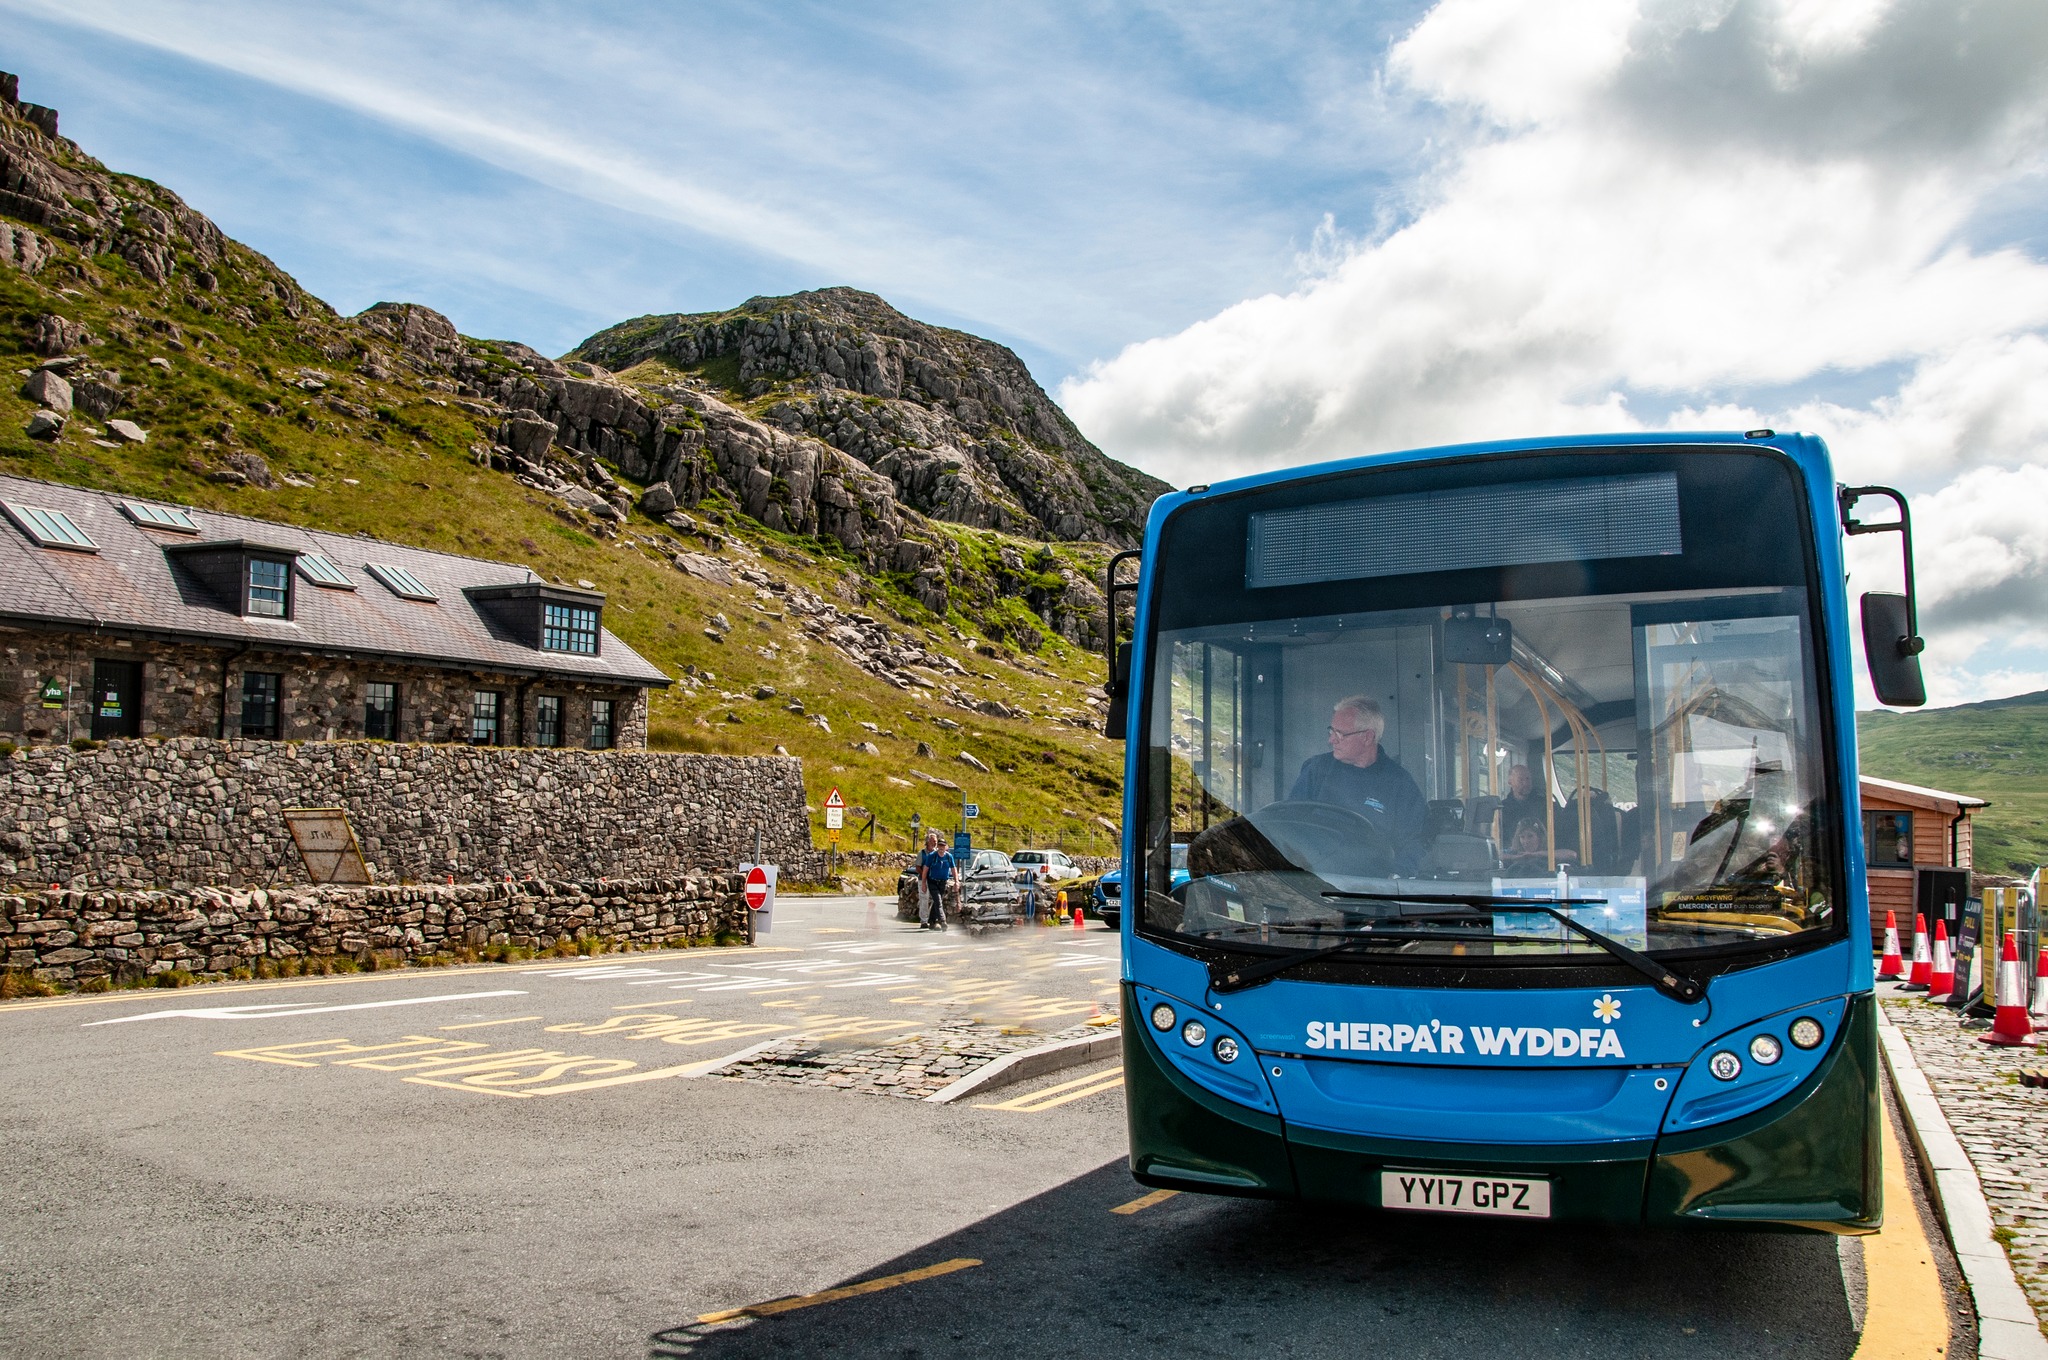 Sherpa'r Wyddfa bus at Pen y Pass on a bright, sunny day.